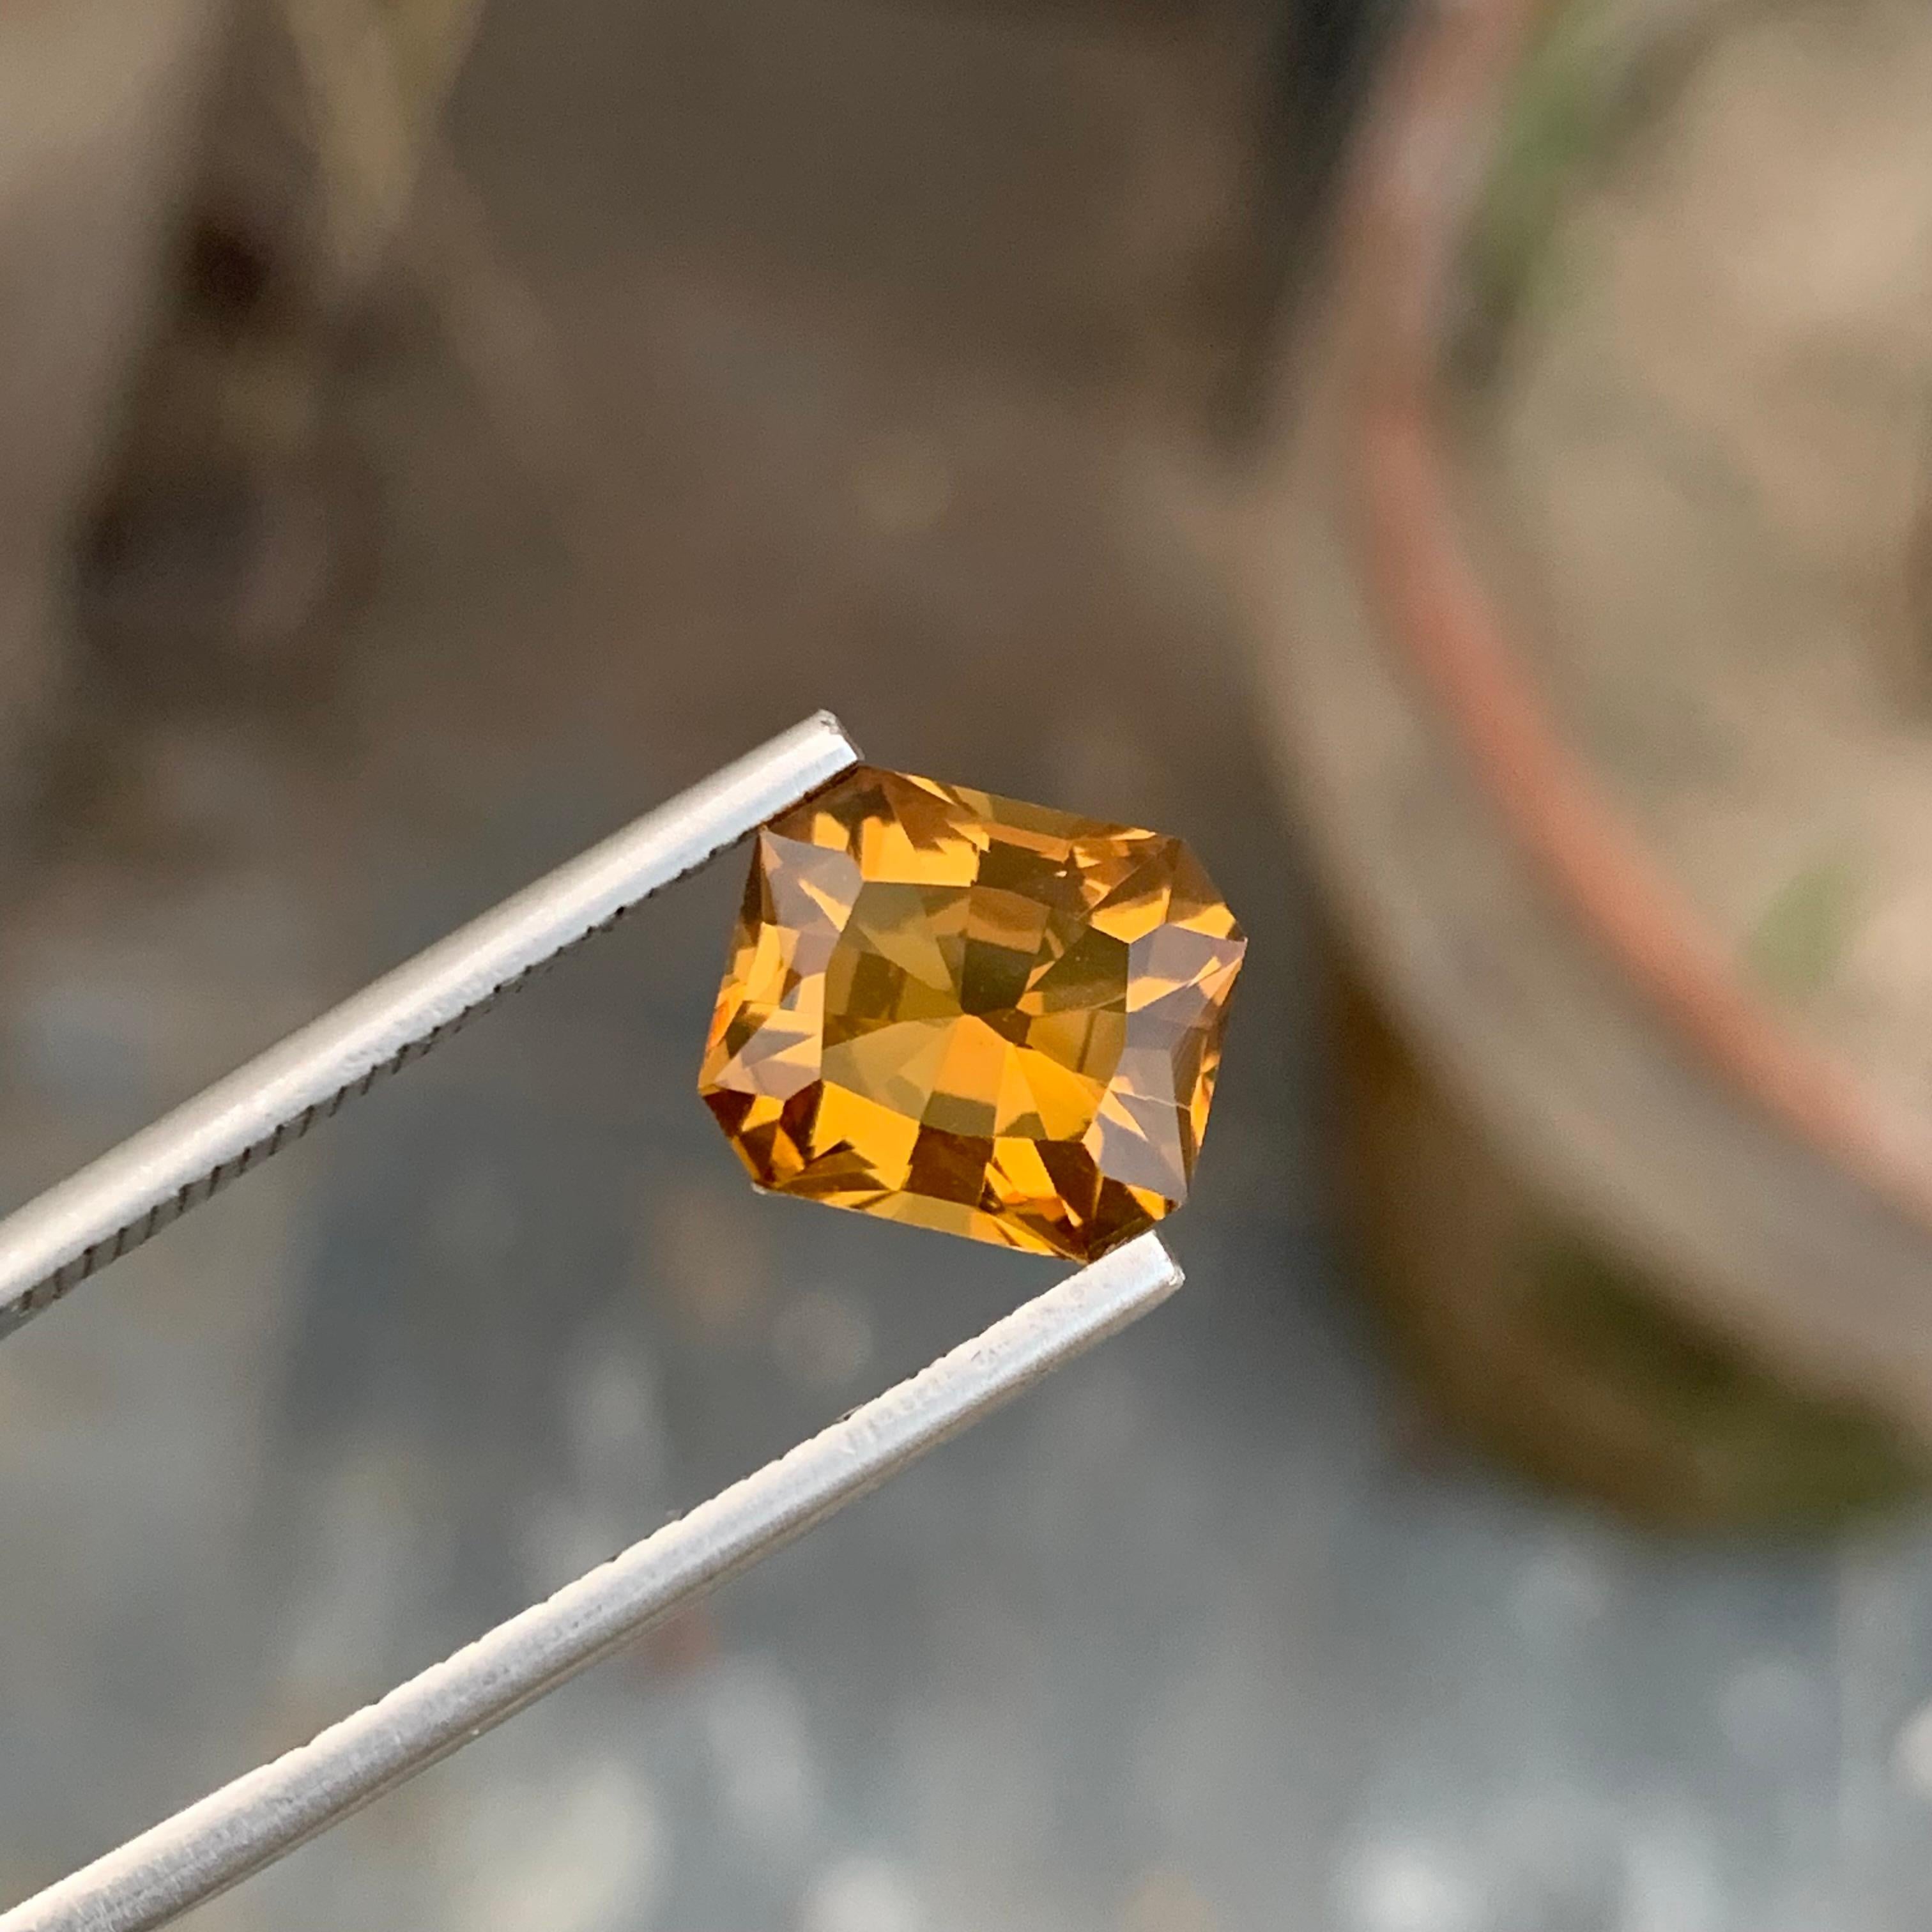 Loose citrine
Weight: 3.45 Carats 
Dimension: 10x8.7x6.1 Mm
Origin: Brazil
Shape: Fancy Emerald 
Color: Yellow
Treatment: Non
Certificate : On Demand
Citrine, a radiant gemstone boasting shades from pale yellow to deep golden hues, is cherished for